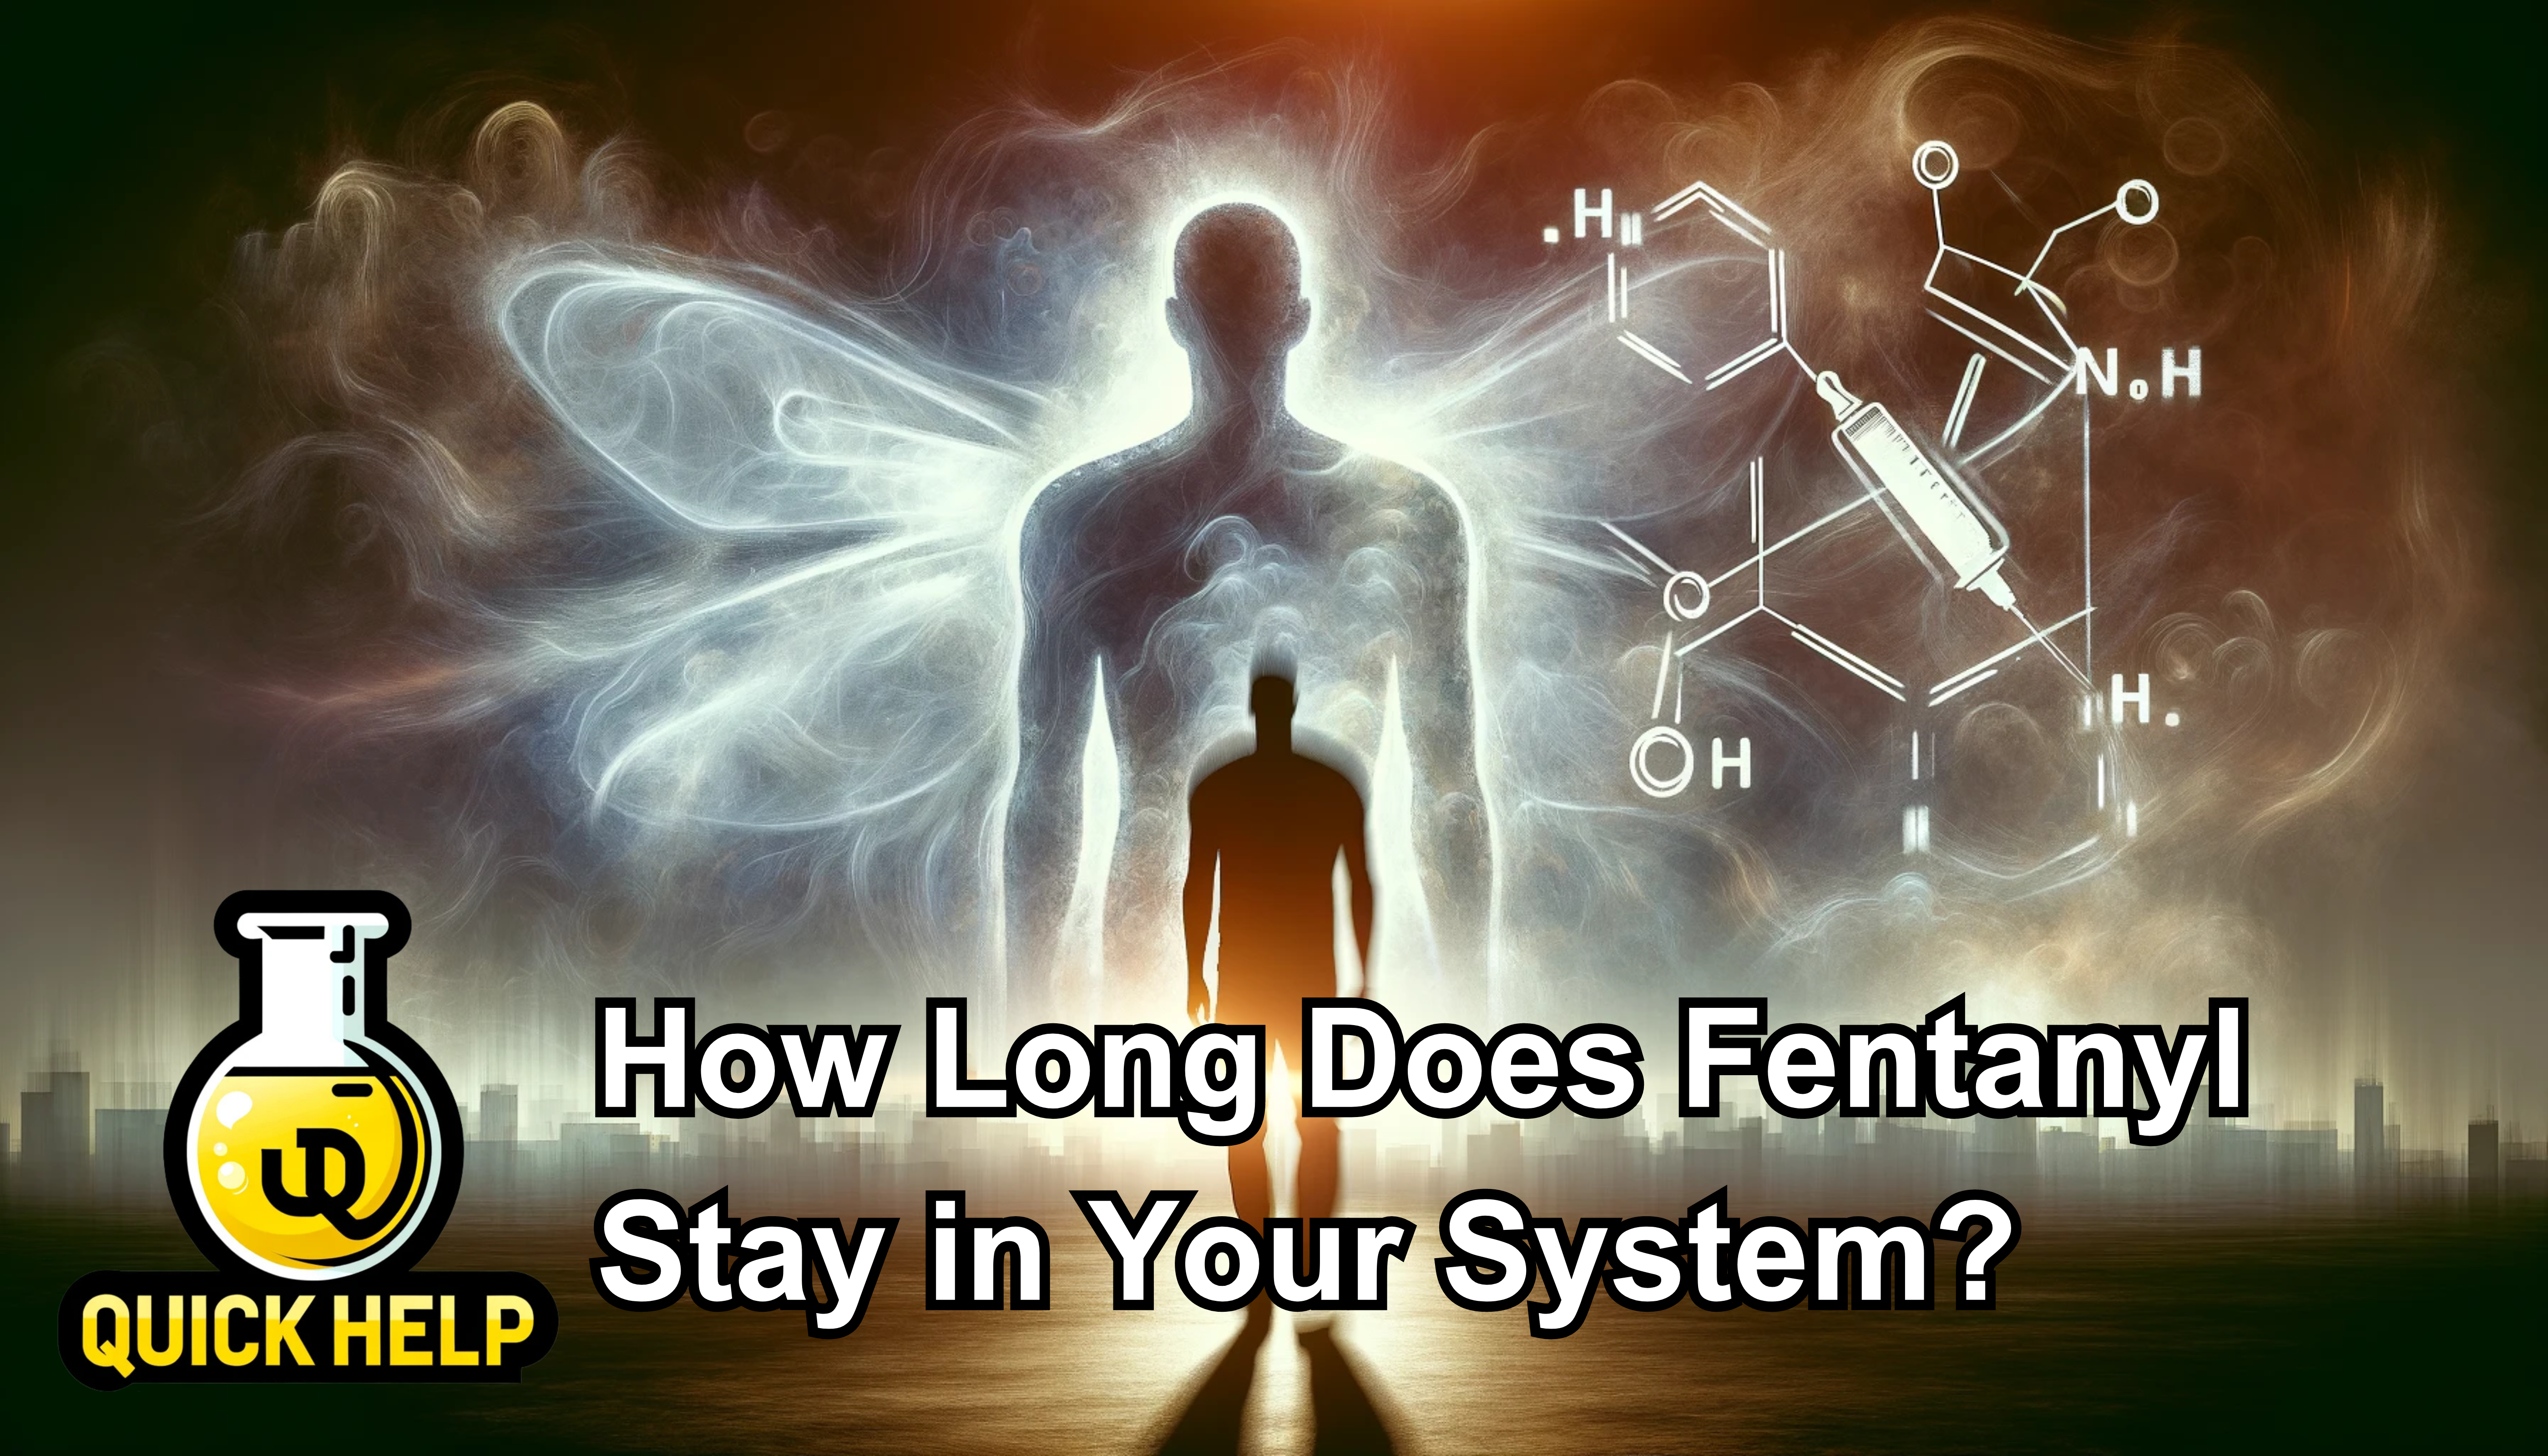 How Long Does Fentanyl Stay in Your System? (Urine)